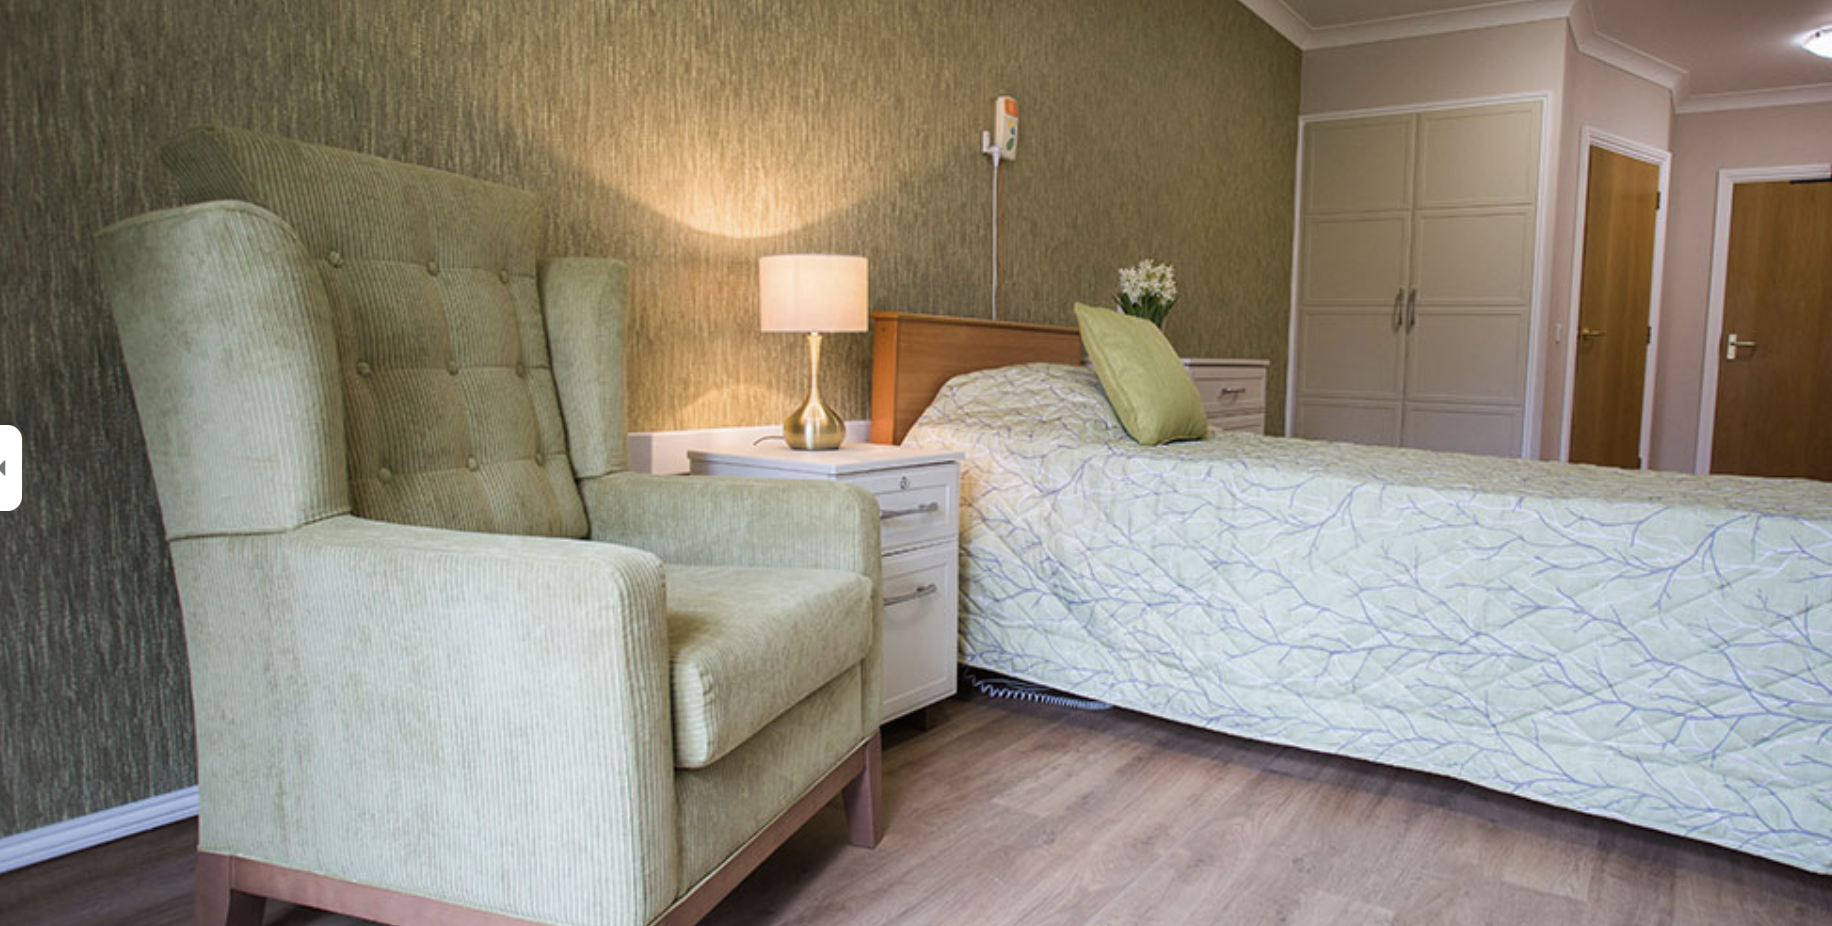 Lounge of Ardenlea Court care home in Solihull, West Midlands